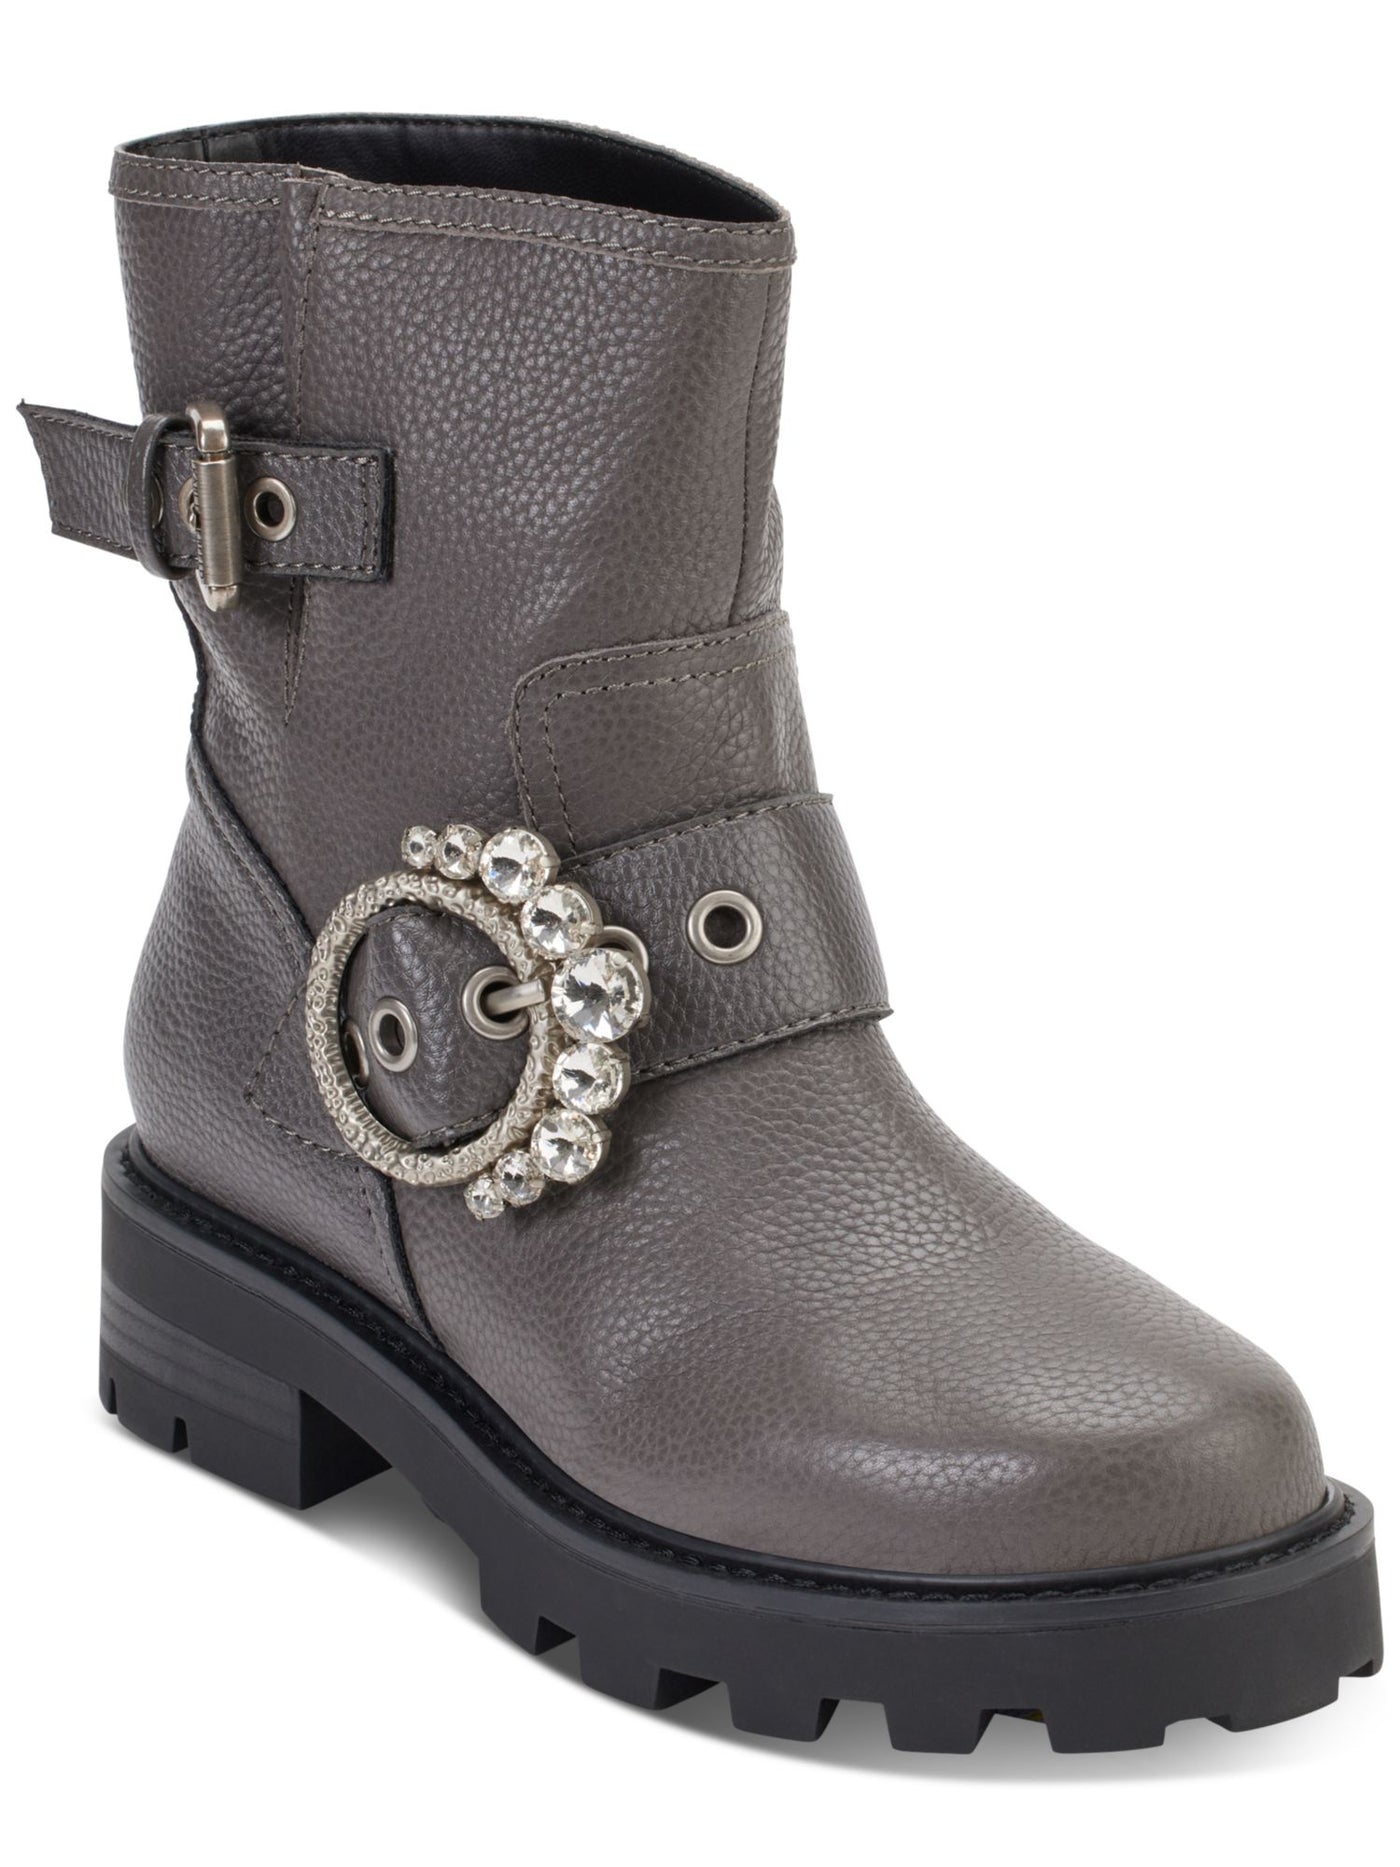 KARL LAGERFELD PARIS Womens Gray Embellished Buckle Accent Marceau Round Toe Block Heel Zip-Up Leather Boots Shoes 9.5 M